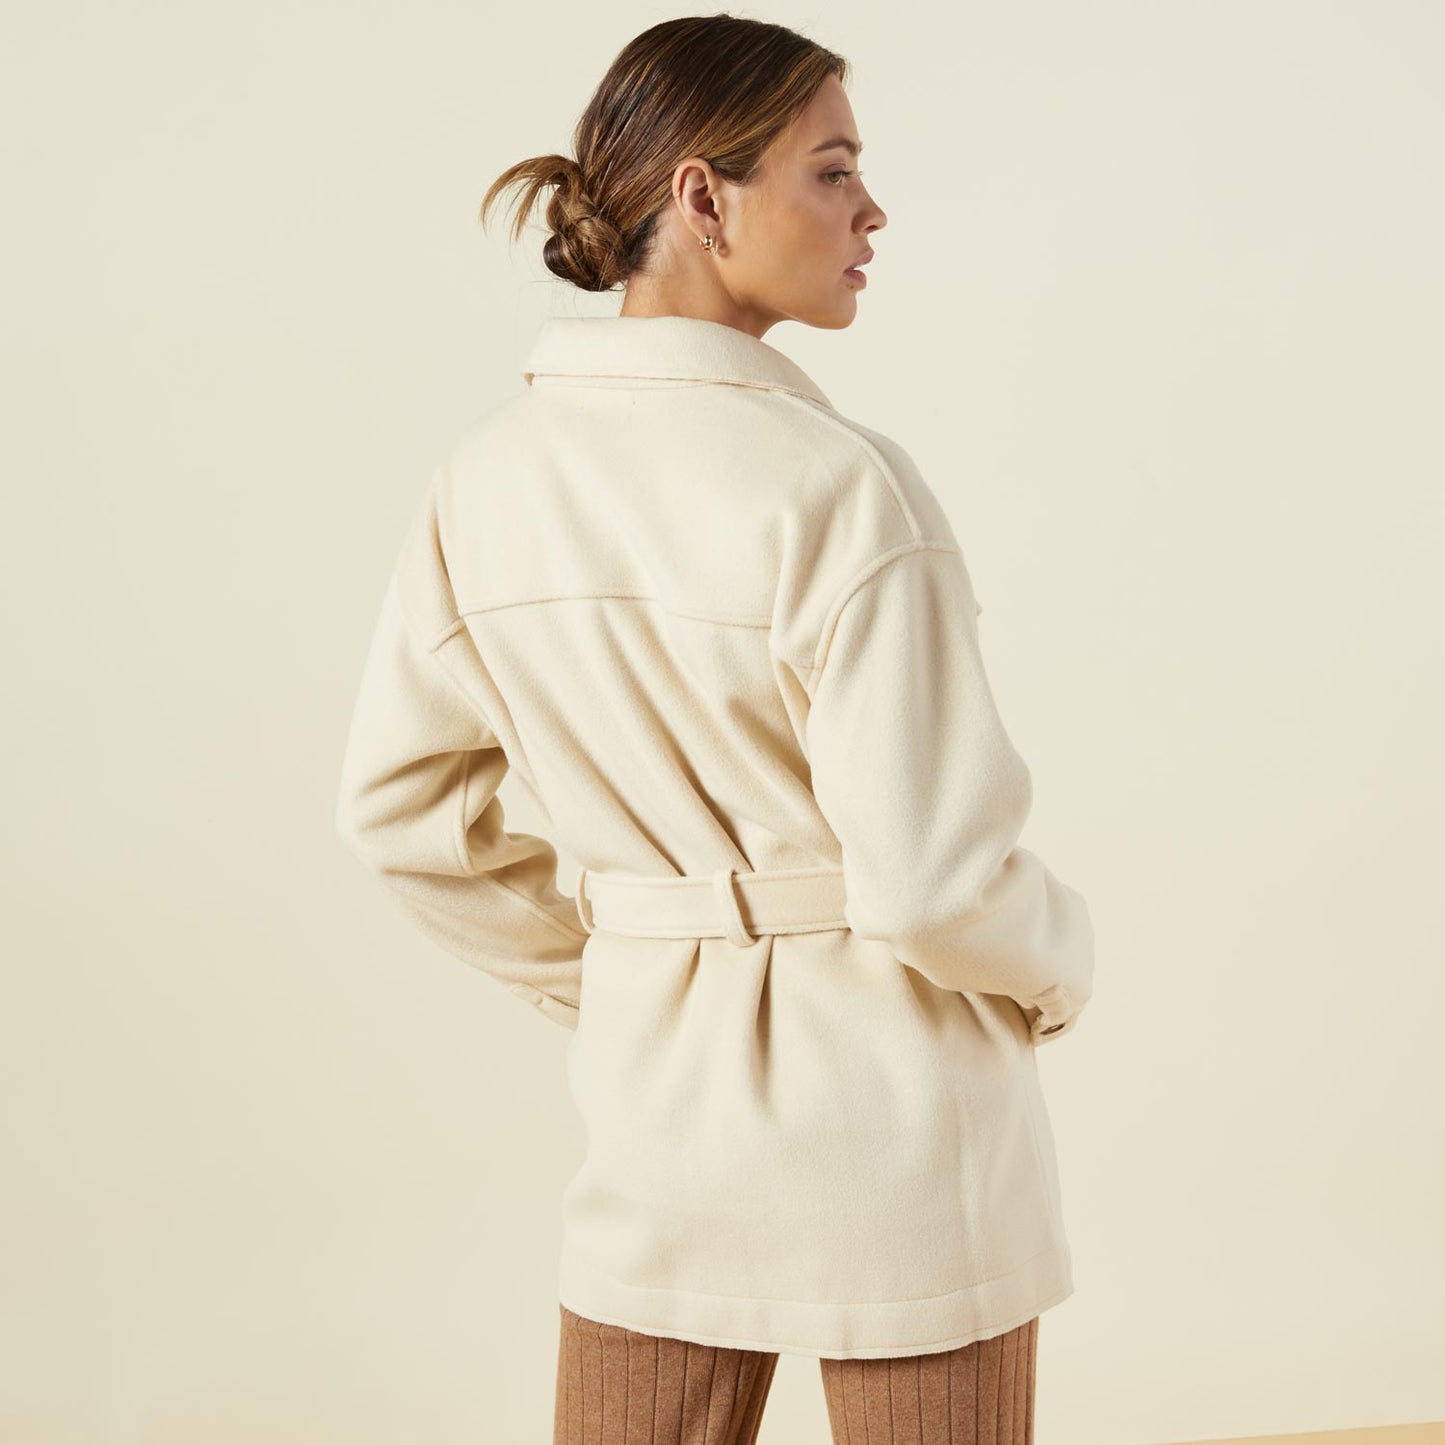 Back view of model wearing the safari jacket in off white.